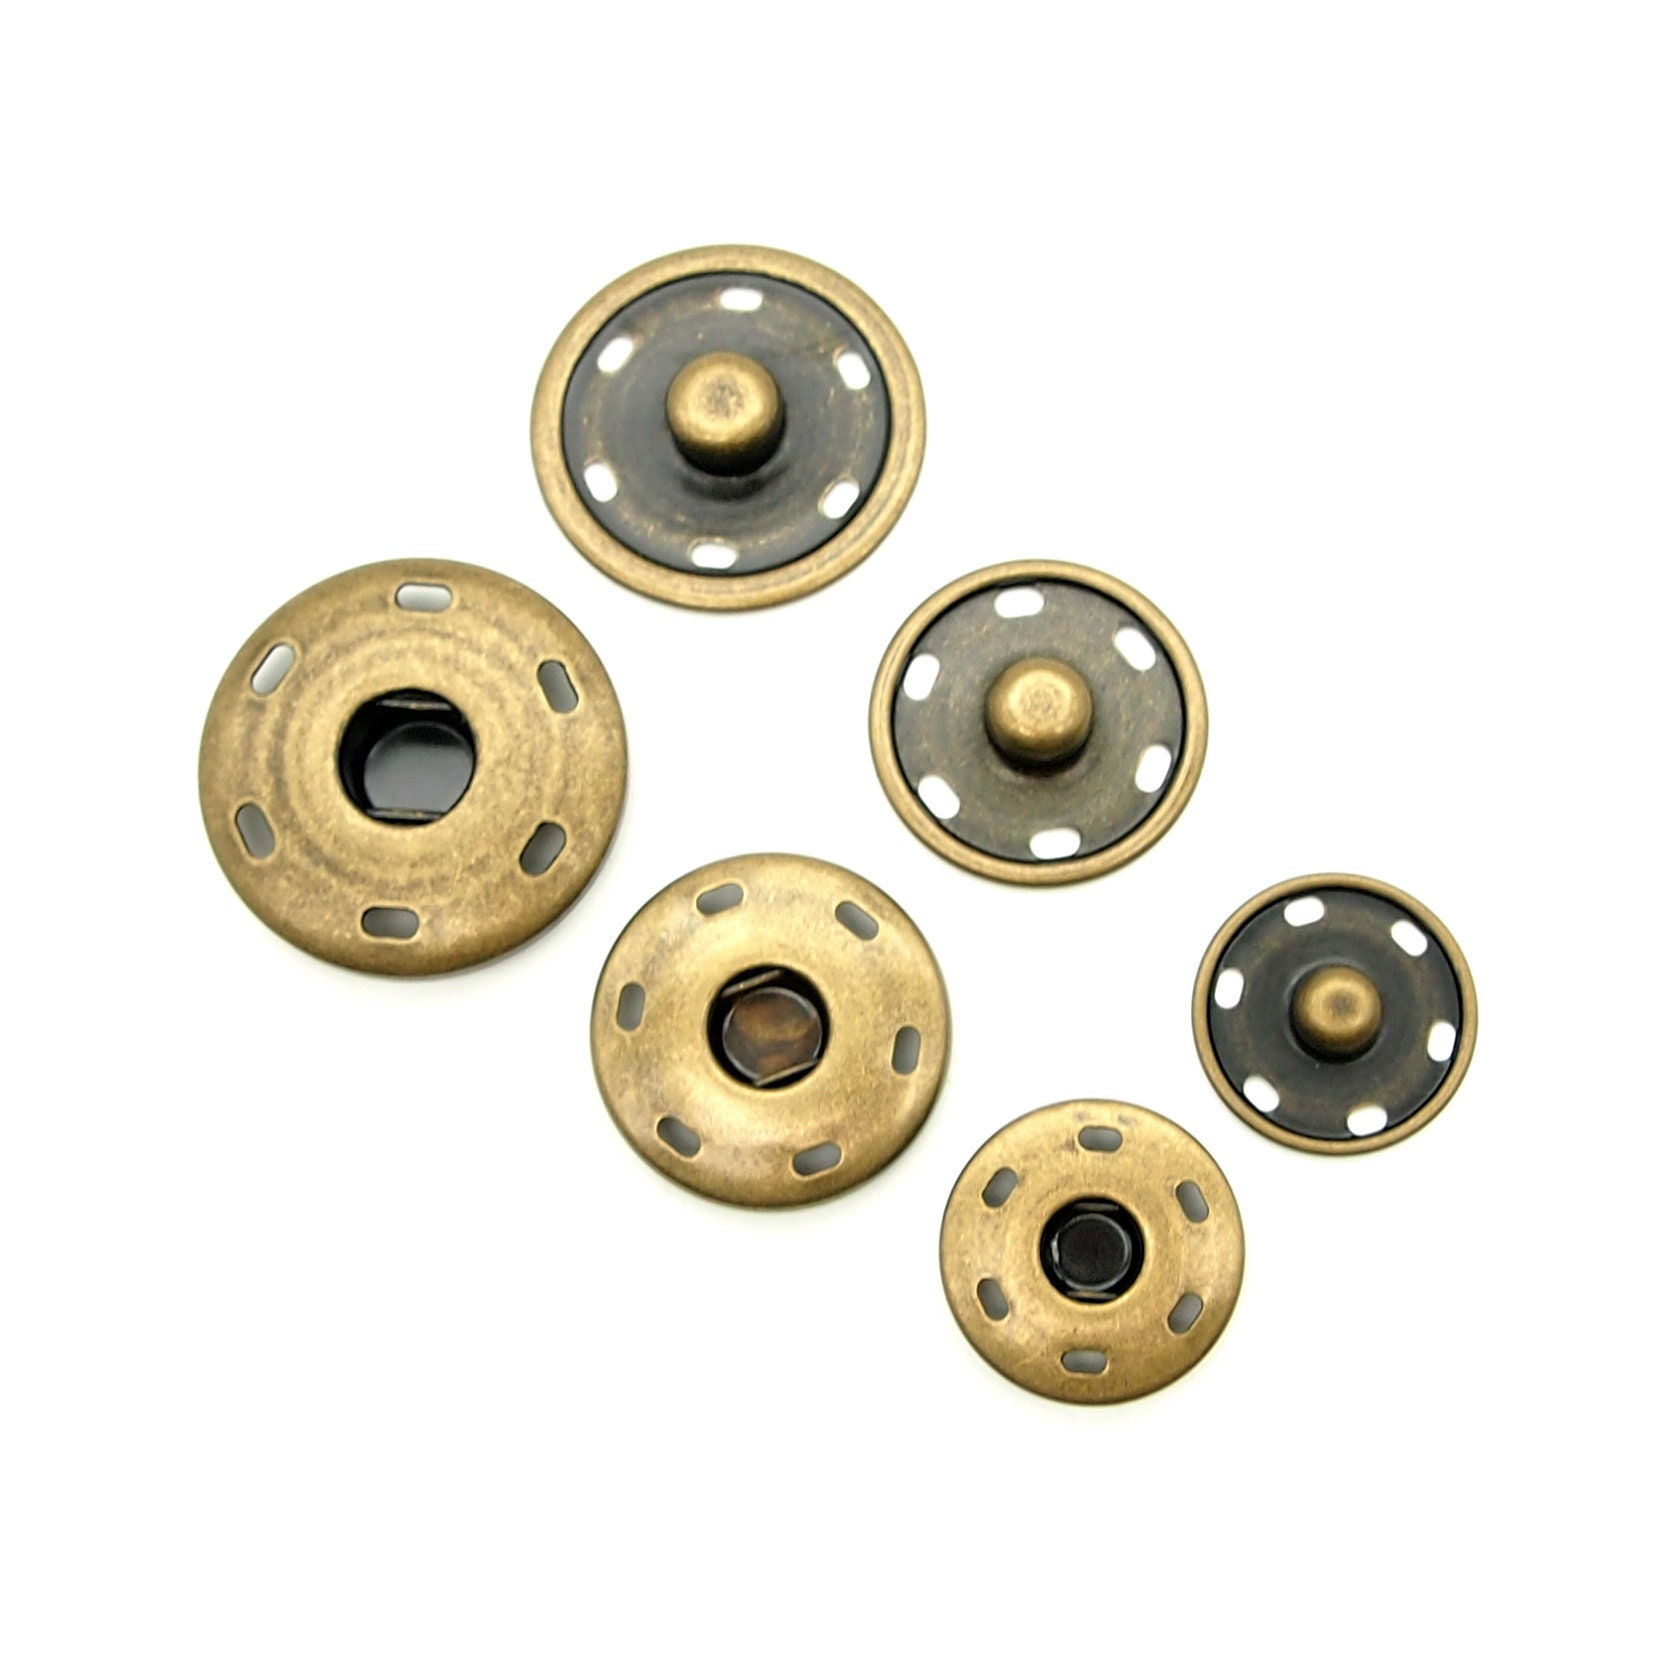 NO-SEW SNAP FASTENERS [S-11665] - $4.00 : American Sewing Supply, Pay Less,  Buy More